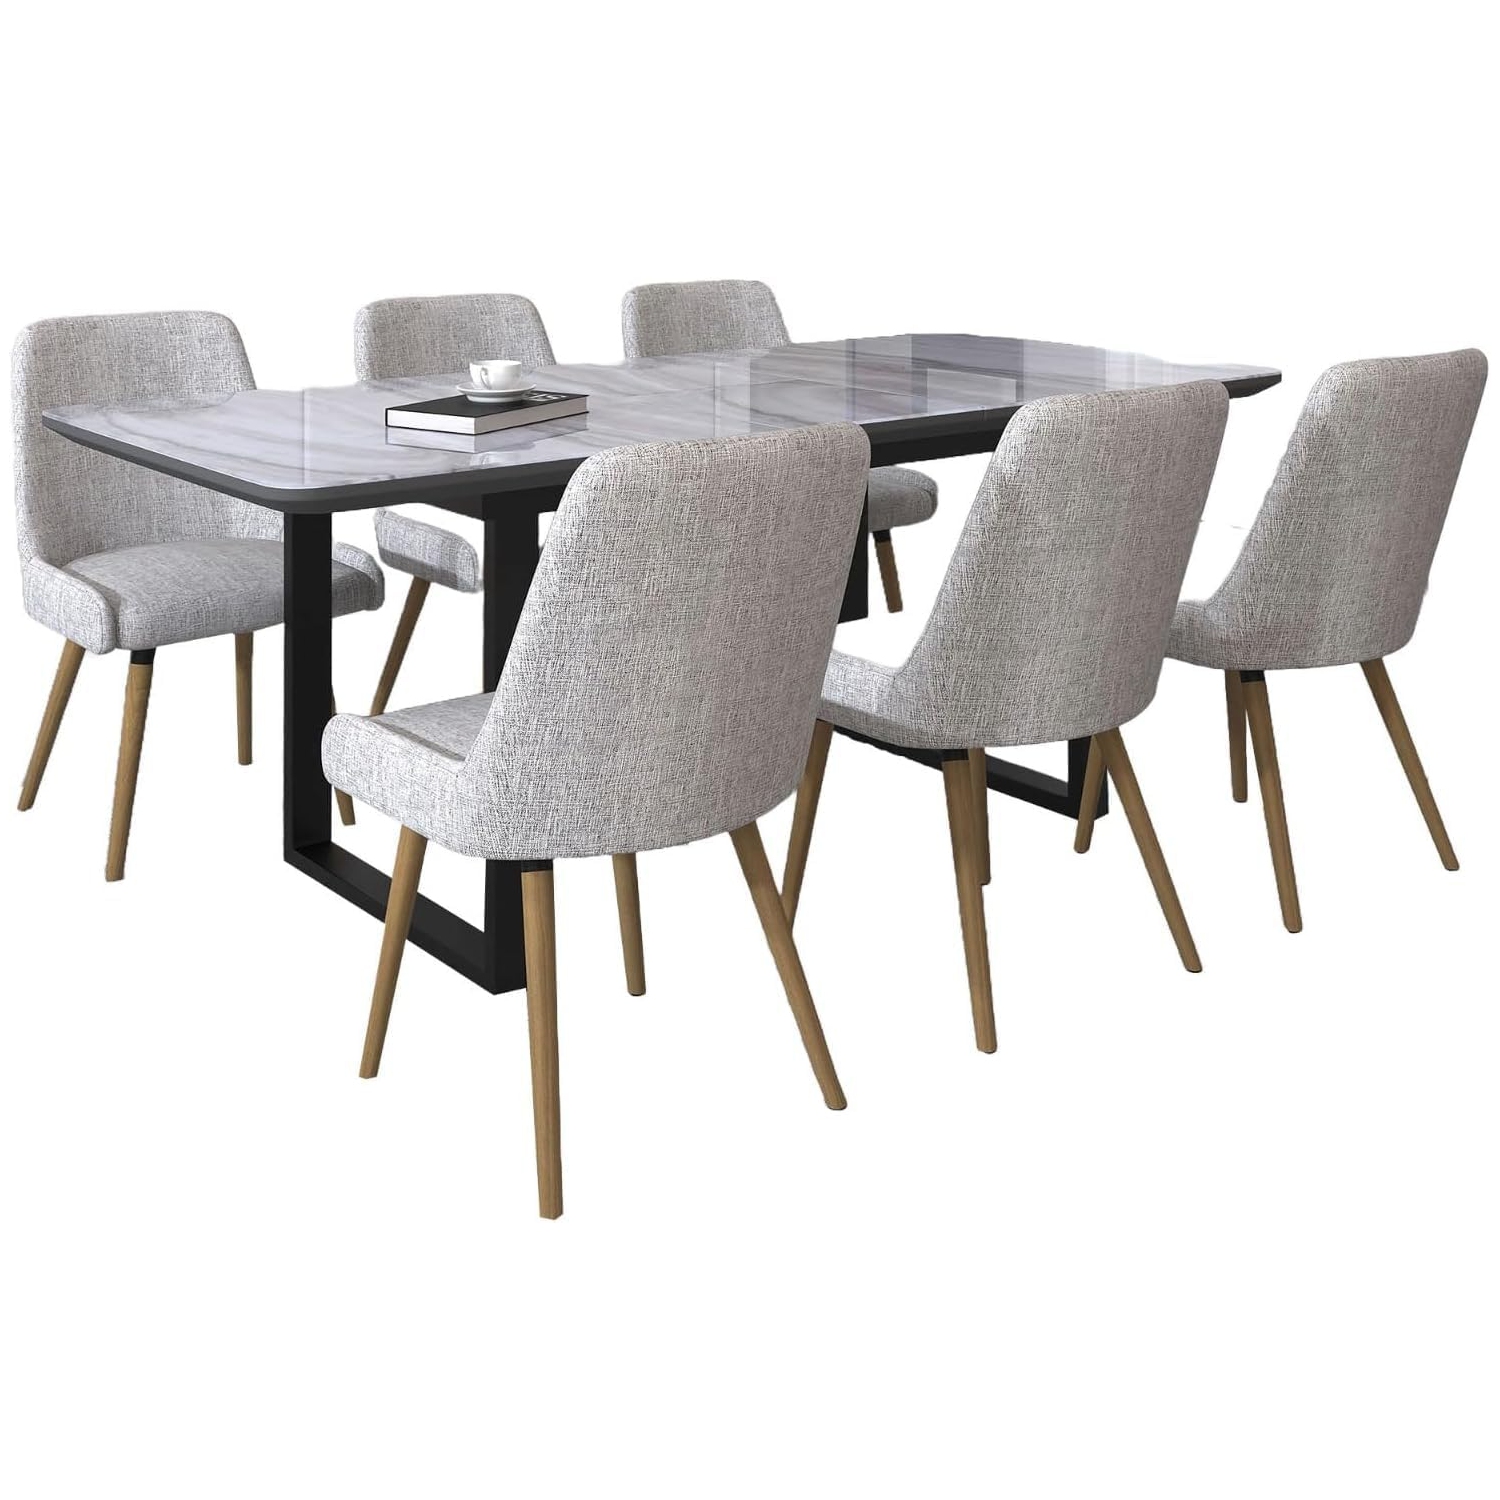 Cosmic Homes Dining Table Set for 6 in Black with Grey & Light Grey Chair | Chaise de Cuisine, Dining Chair for Modern Kitchen | Small Kitchen Table & Chaises Salle a Manger